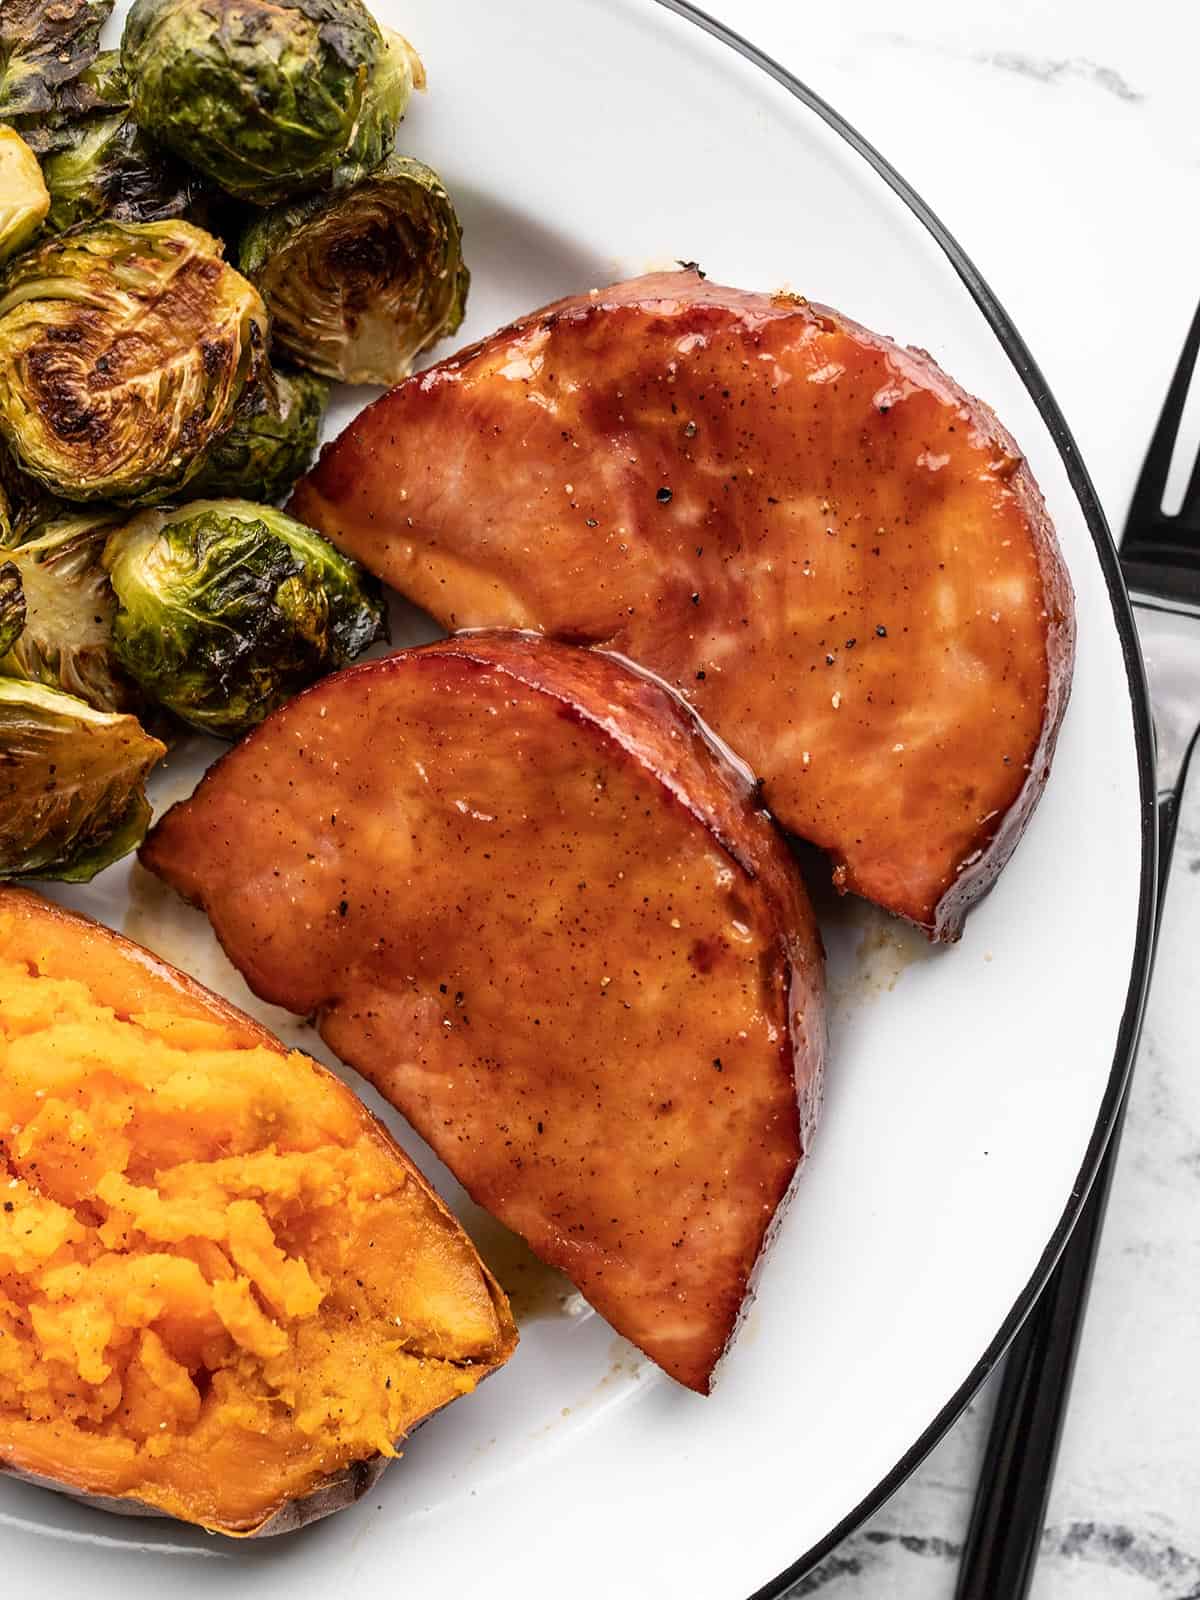 Two glazed ham steaks on a plate with Brussels sprouts and sweet potato